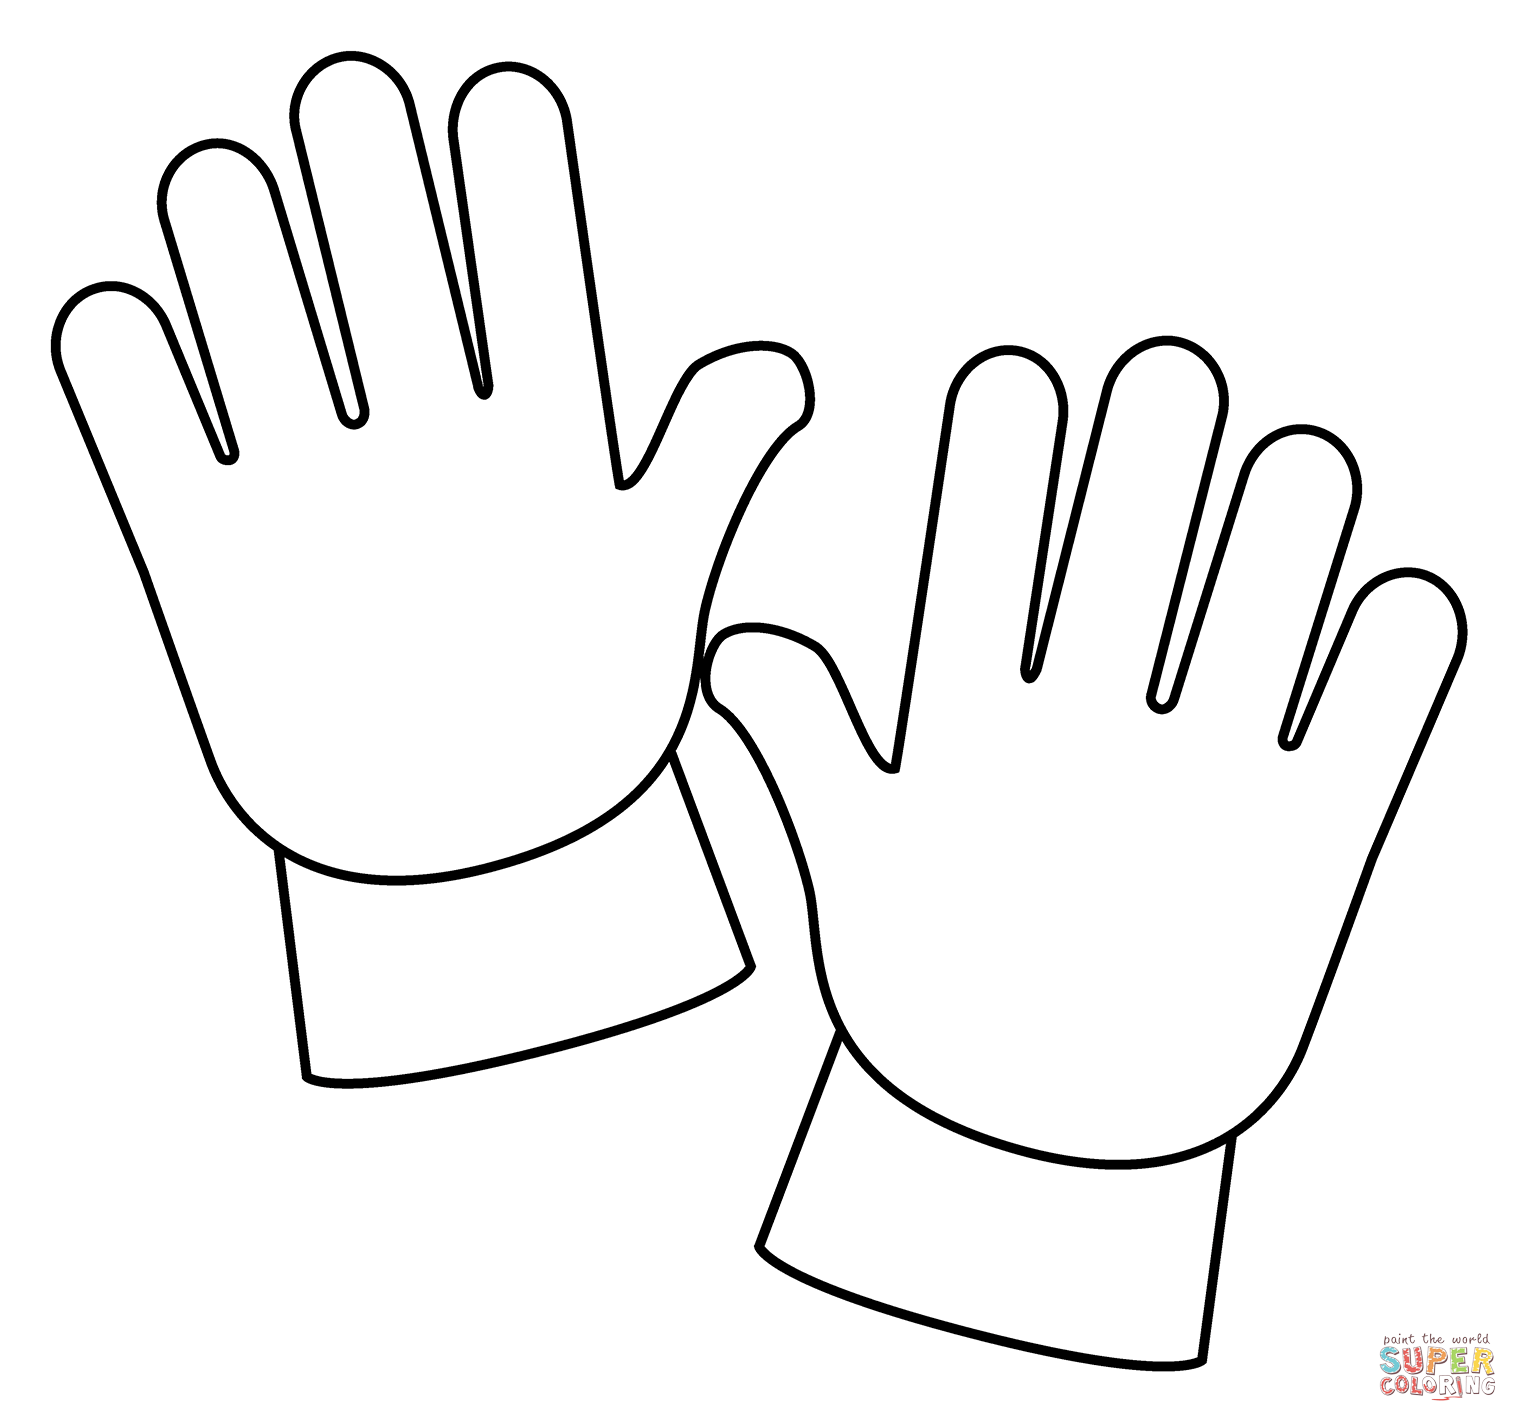 Gloves emoji coloring page free printable coloring pages